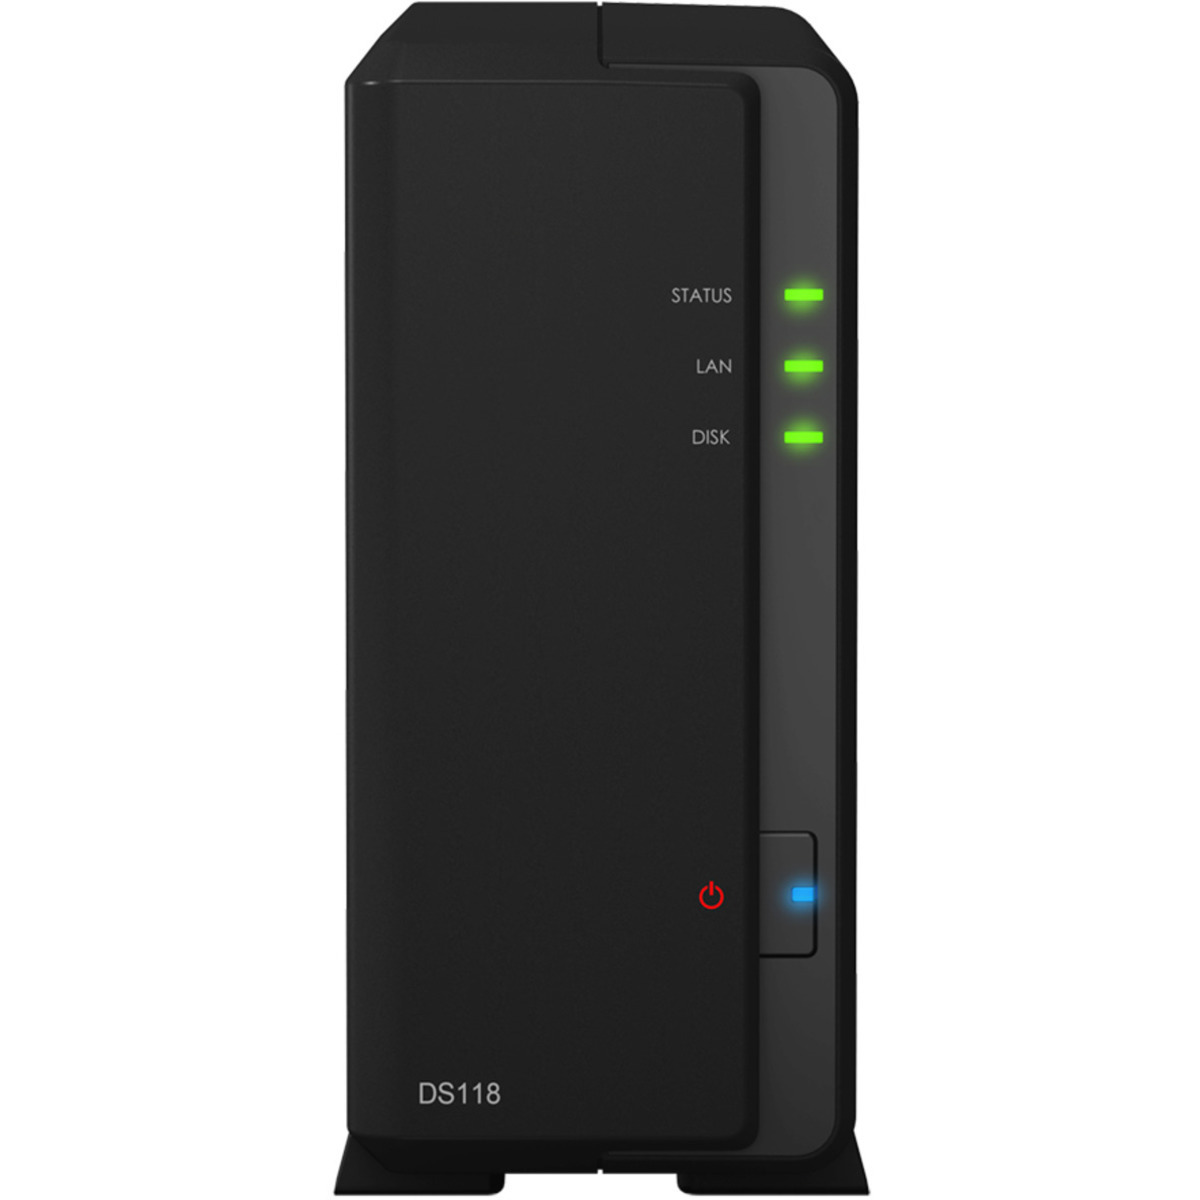 buy $548 Synology DiskStation DS118 16tb Desktop NAS - Network Attached Storage Device 1x16000gb Toshiba Enterprise Capacity MG08ACA16TE 3.5 7200rpm SATA 6Gb/s HDD ENTERPRISE Class Drives Installed - Burn-In Tested - nas headquarters buy network attached storage server device das new raid-5 free shipping simply usa DiskStation DS118